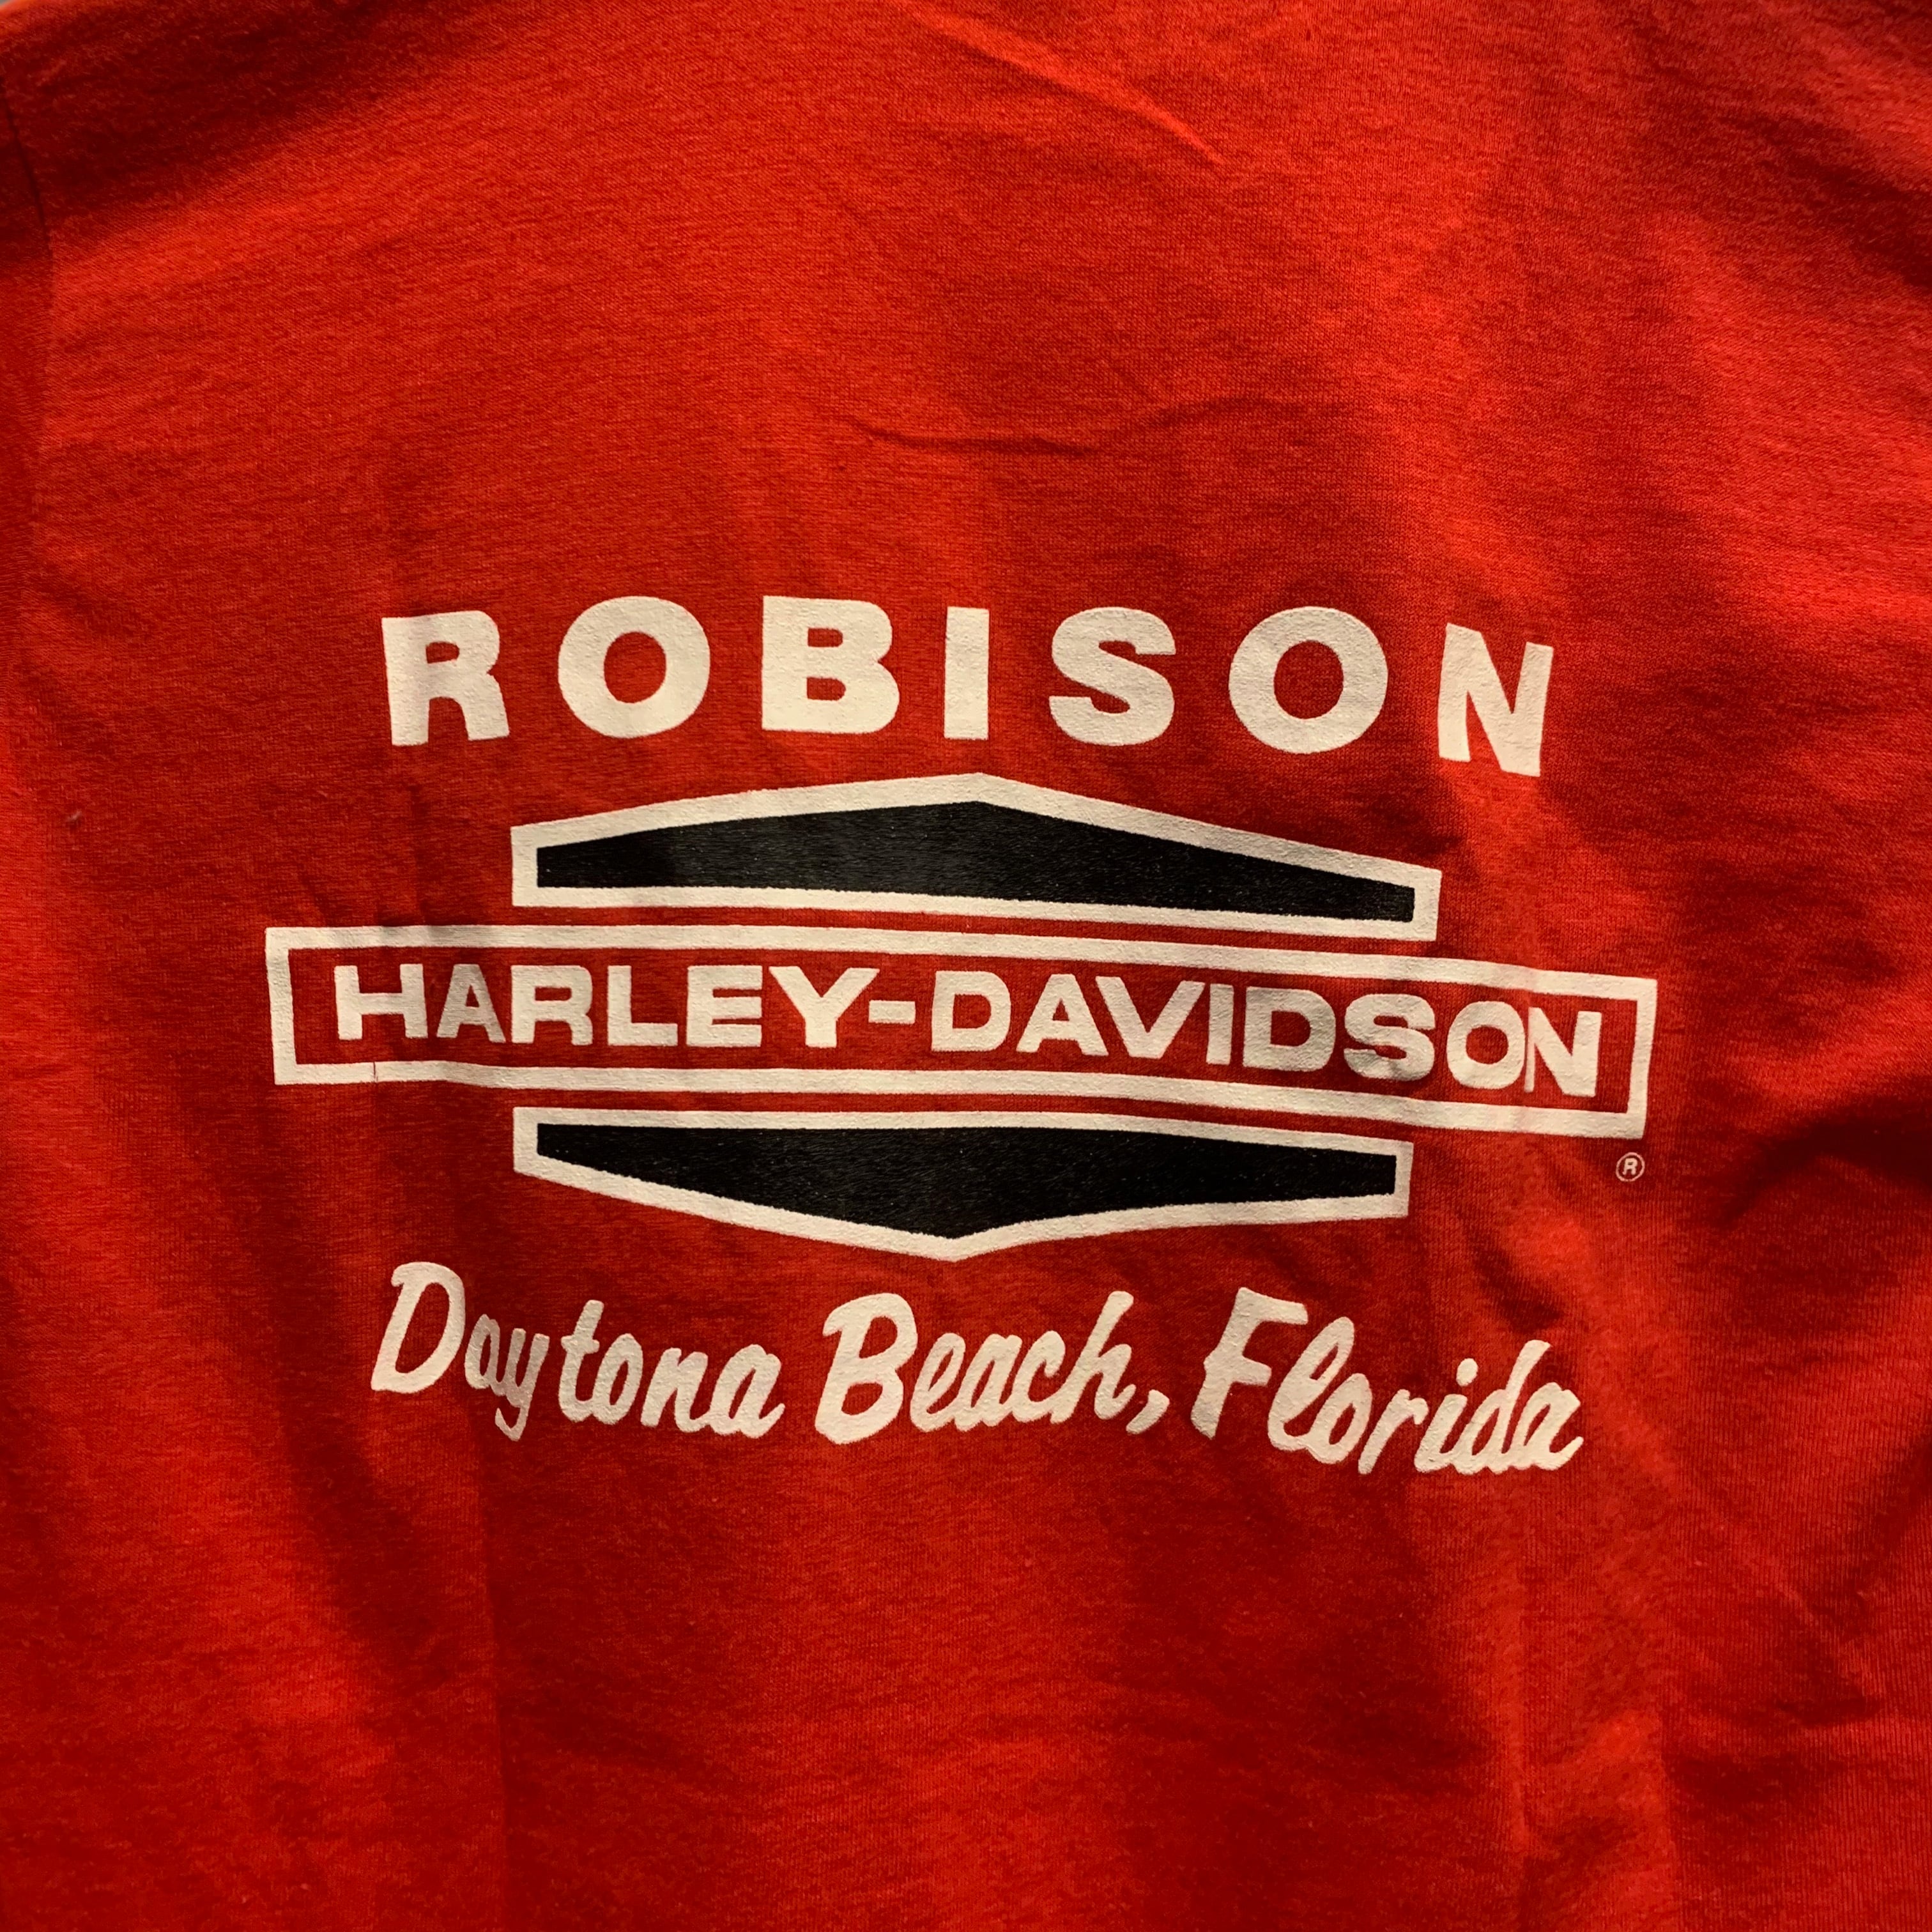 Harley Davidson red color t-shirts ハーレー・ダヴィッドソン デットストック 赤 半袖シャツ  Sサイズ/1800171 | number12 powered by BASE